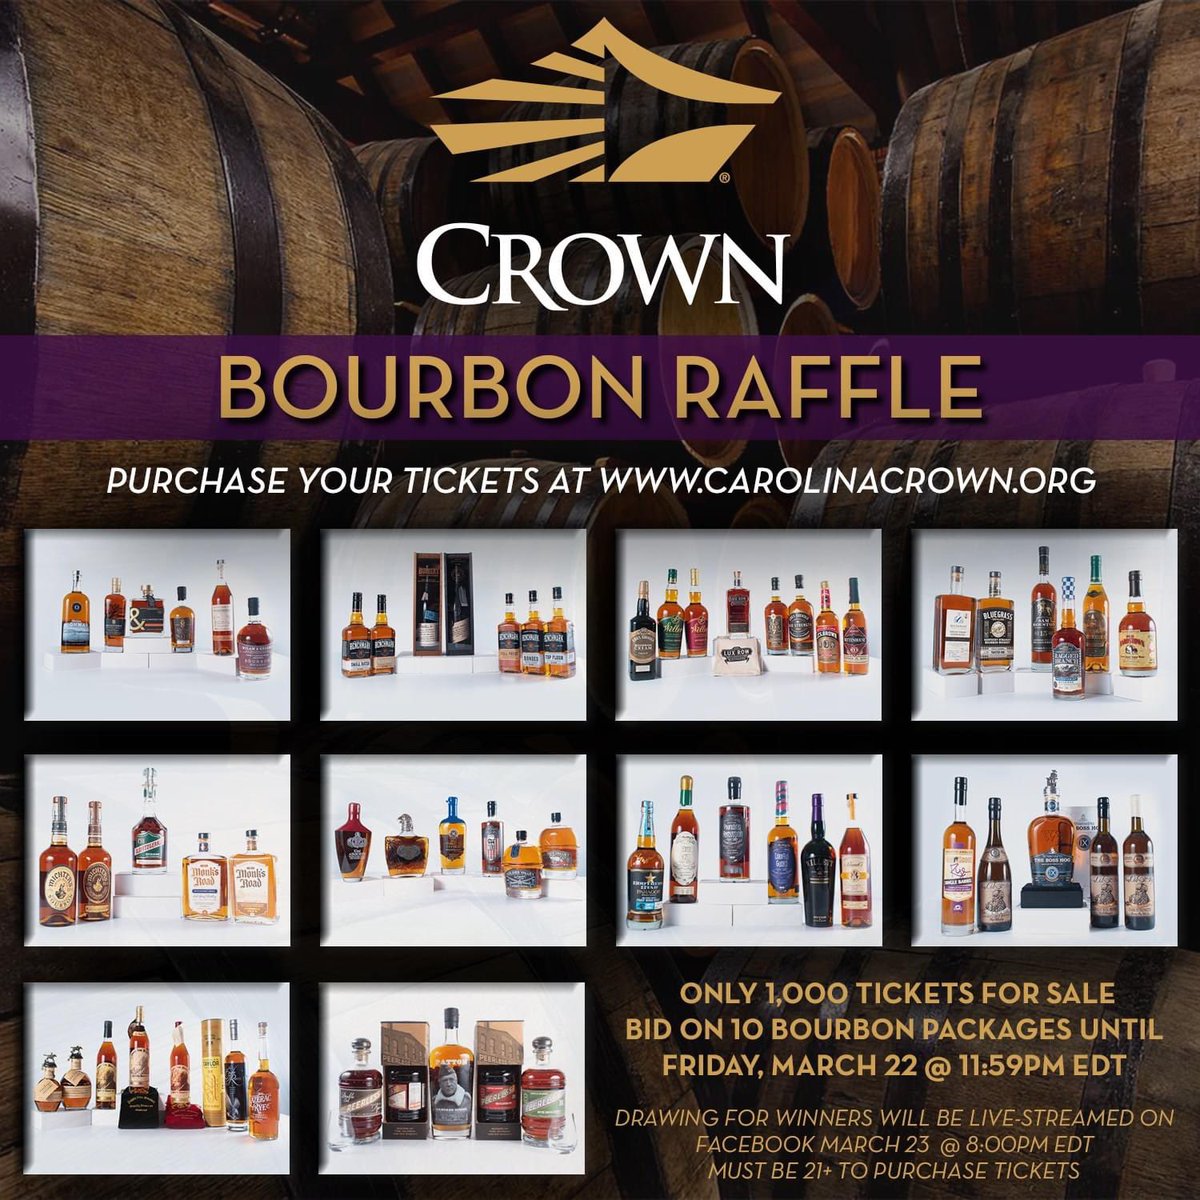 Last chance to support Carolina Crown and win some amazing bourbon! Ticket sales end tonight at 11:59pm EST 🎟 tinyurl.com/CrownBourbonRa…